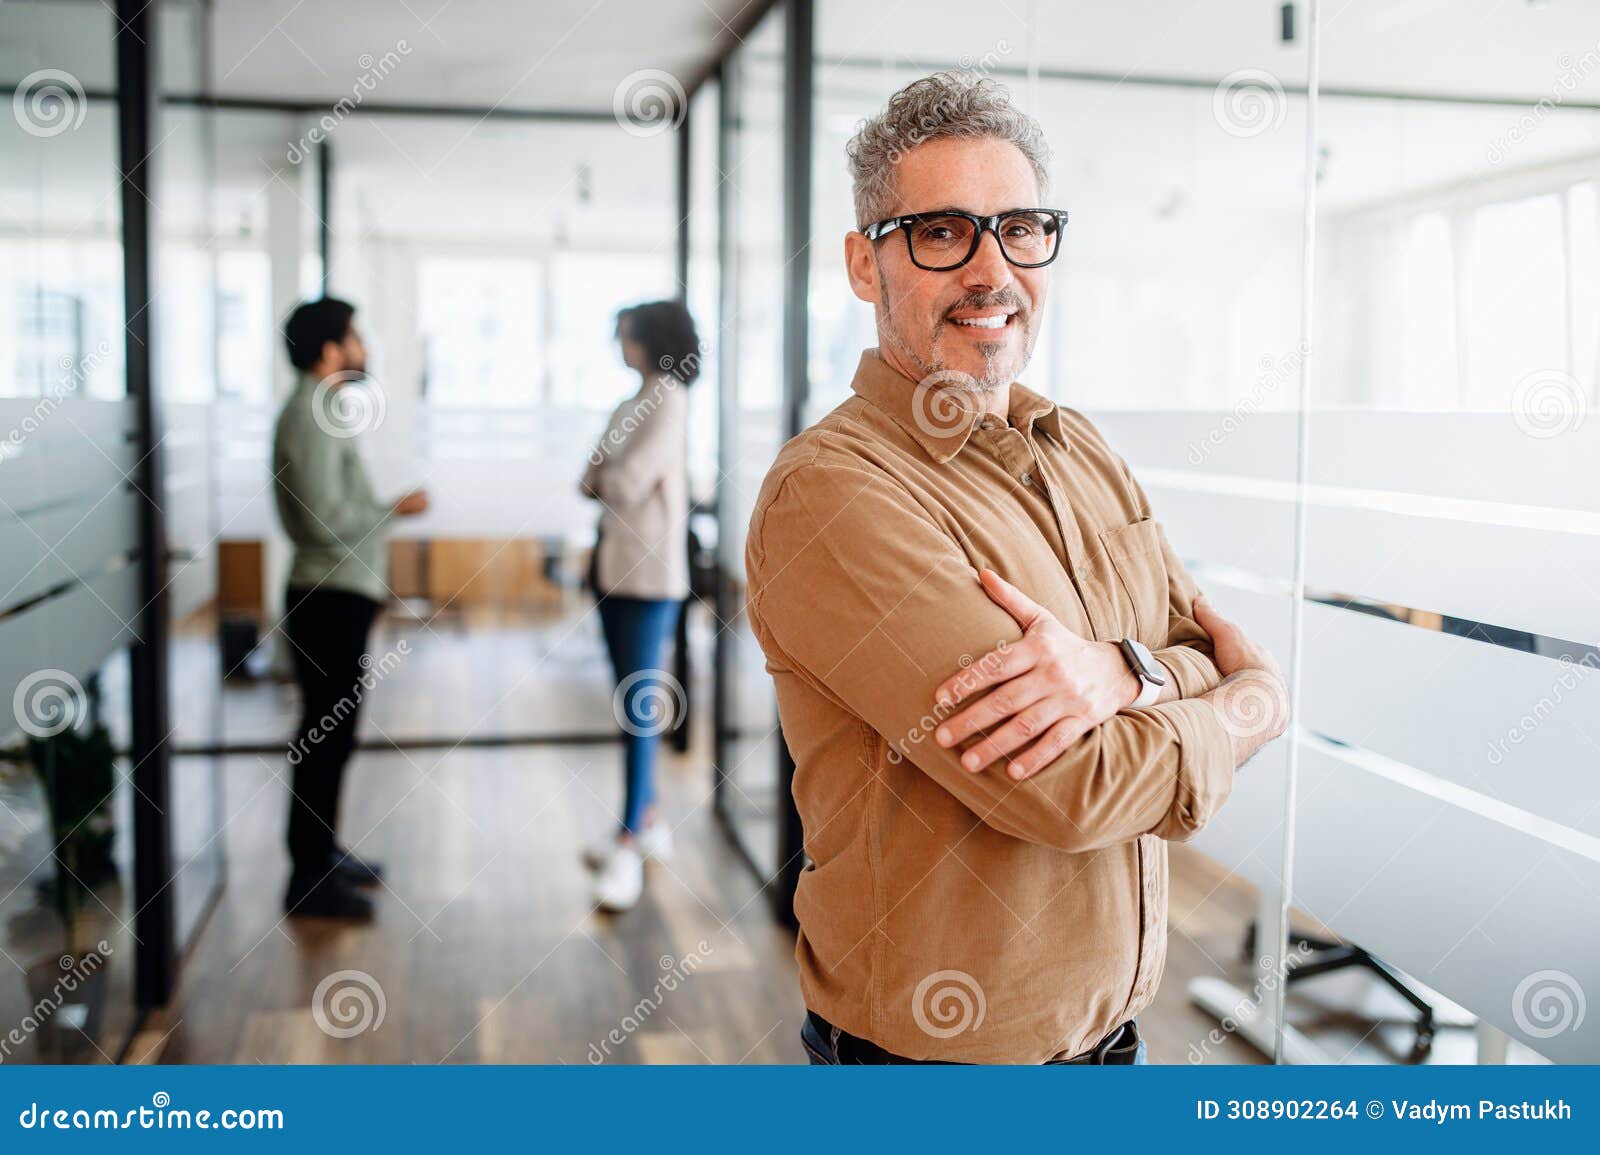 Mature man manager with a genial smile crosses his arms in satisfaction. Senior businessman in casual wear stands with crossed arms in office, a blurred conversation between colleagues in the background, a moment of individual focus within a collaborative team environment